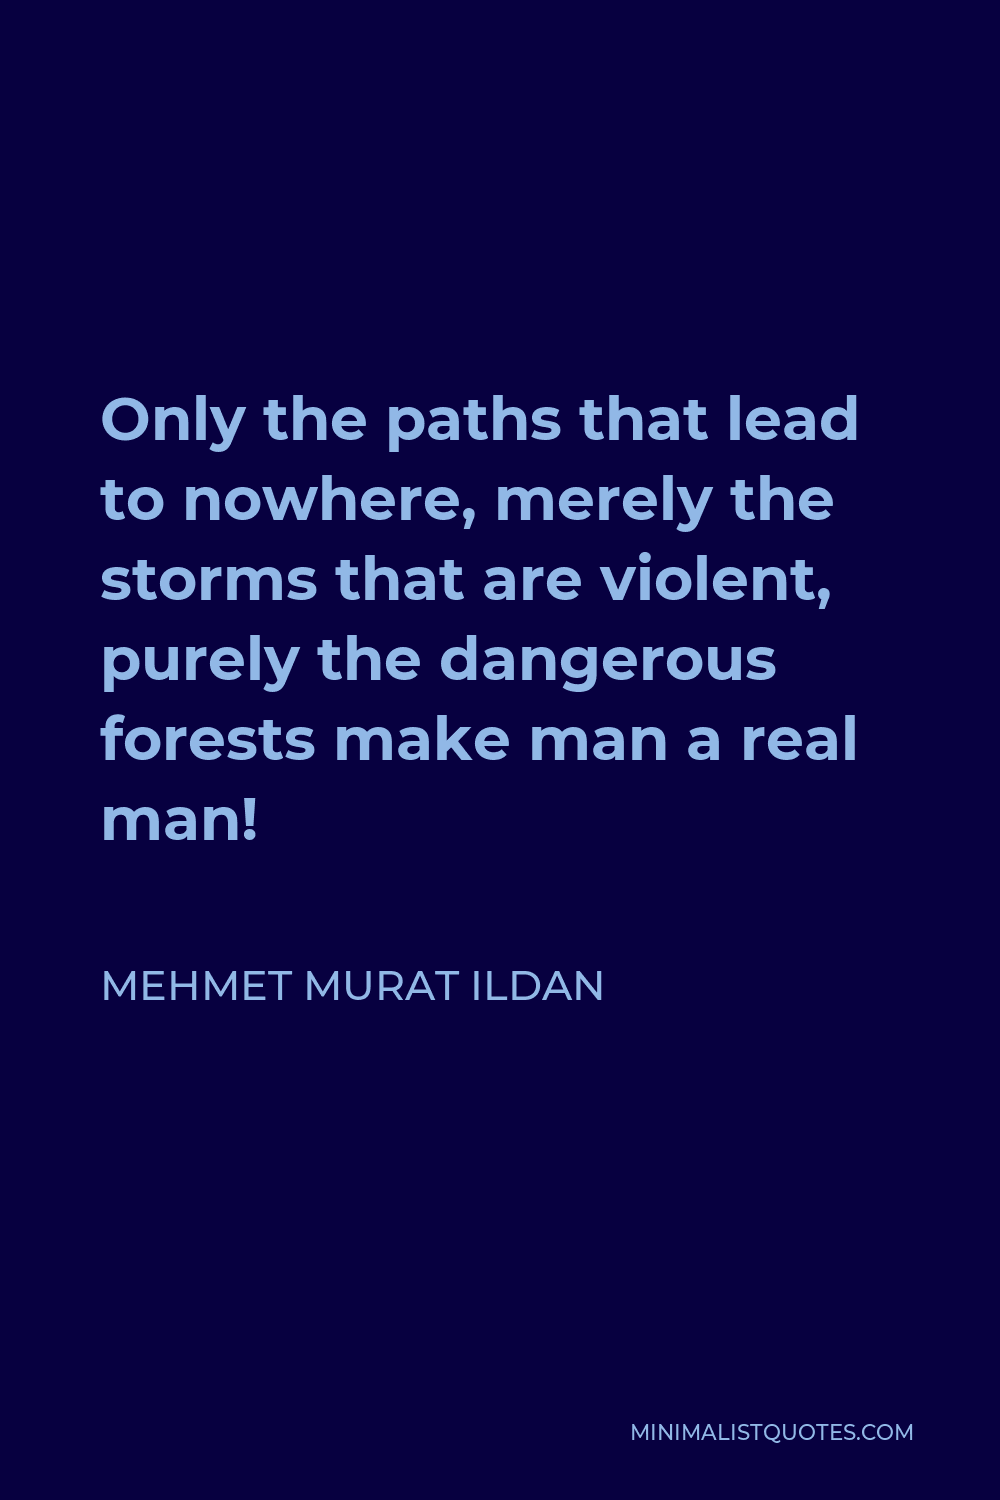 Mehmet Murat Ildan Quote - Only the paths that lead to nowhere, merely the storms that are violent, purely the dangerous forests make man a real man!